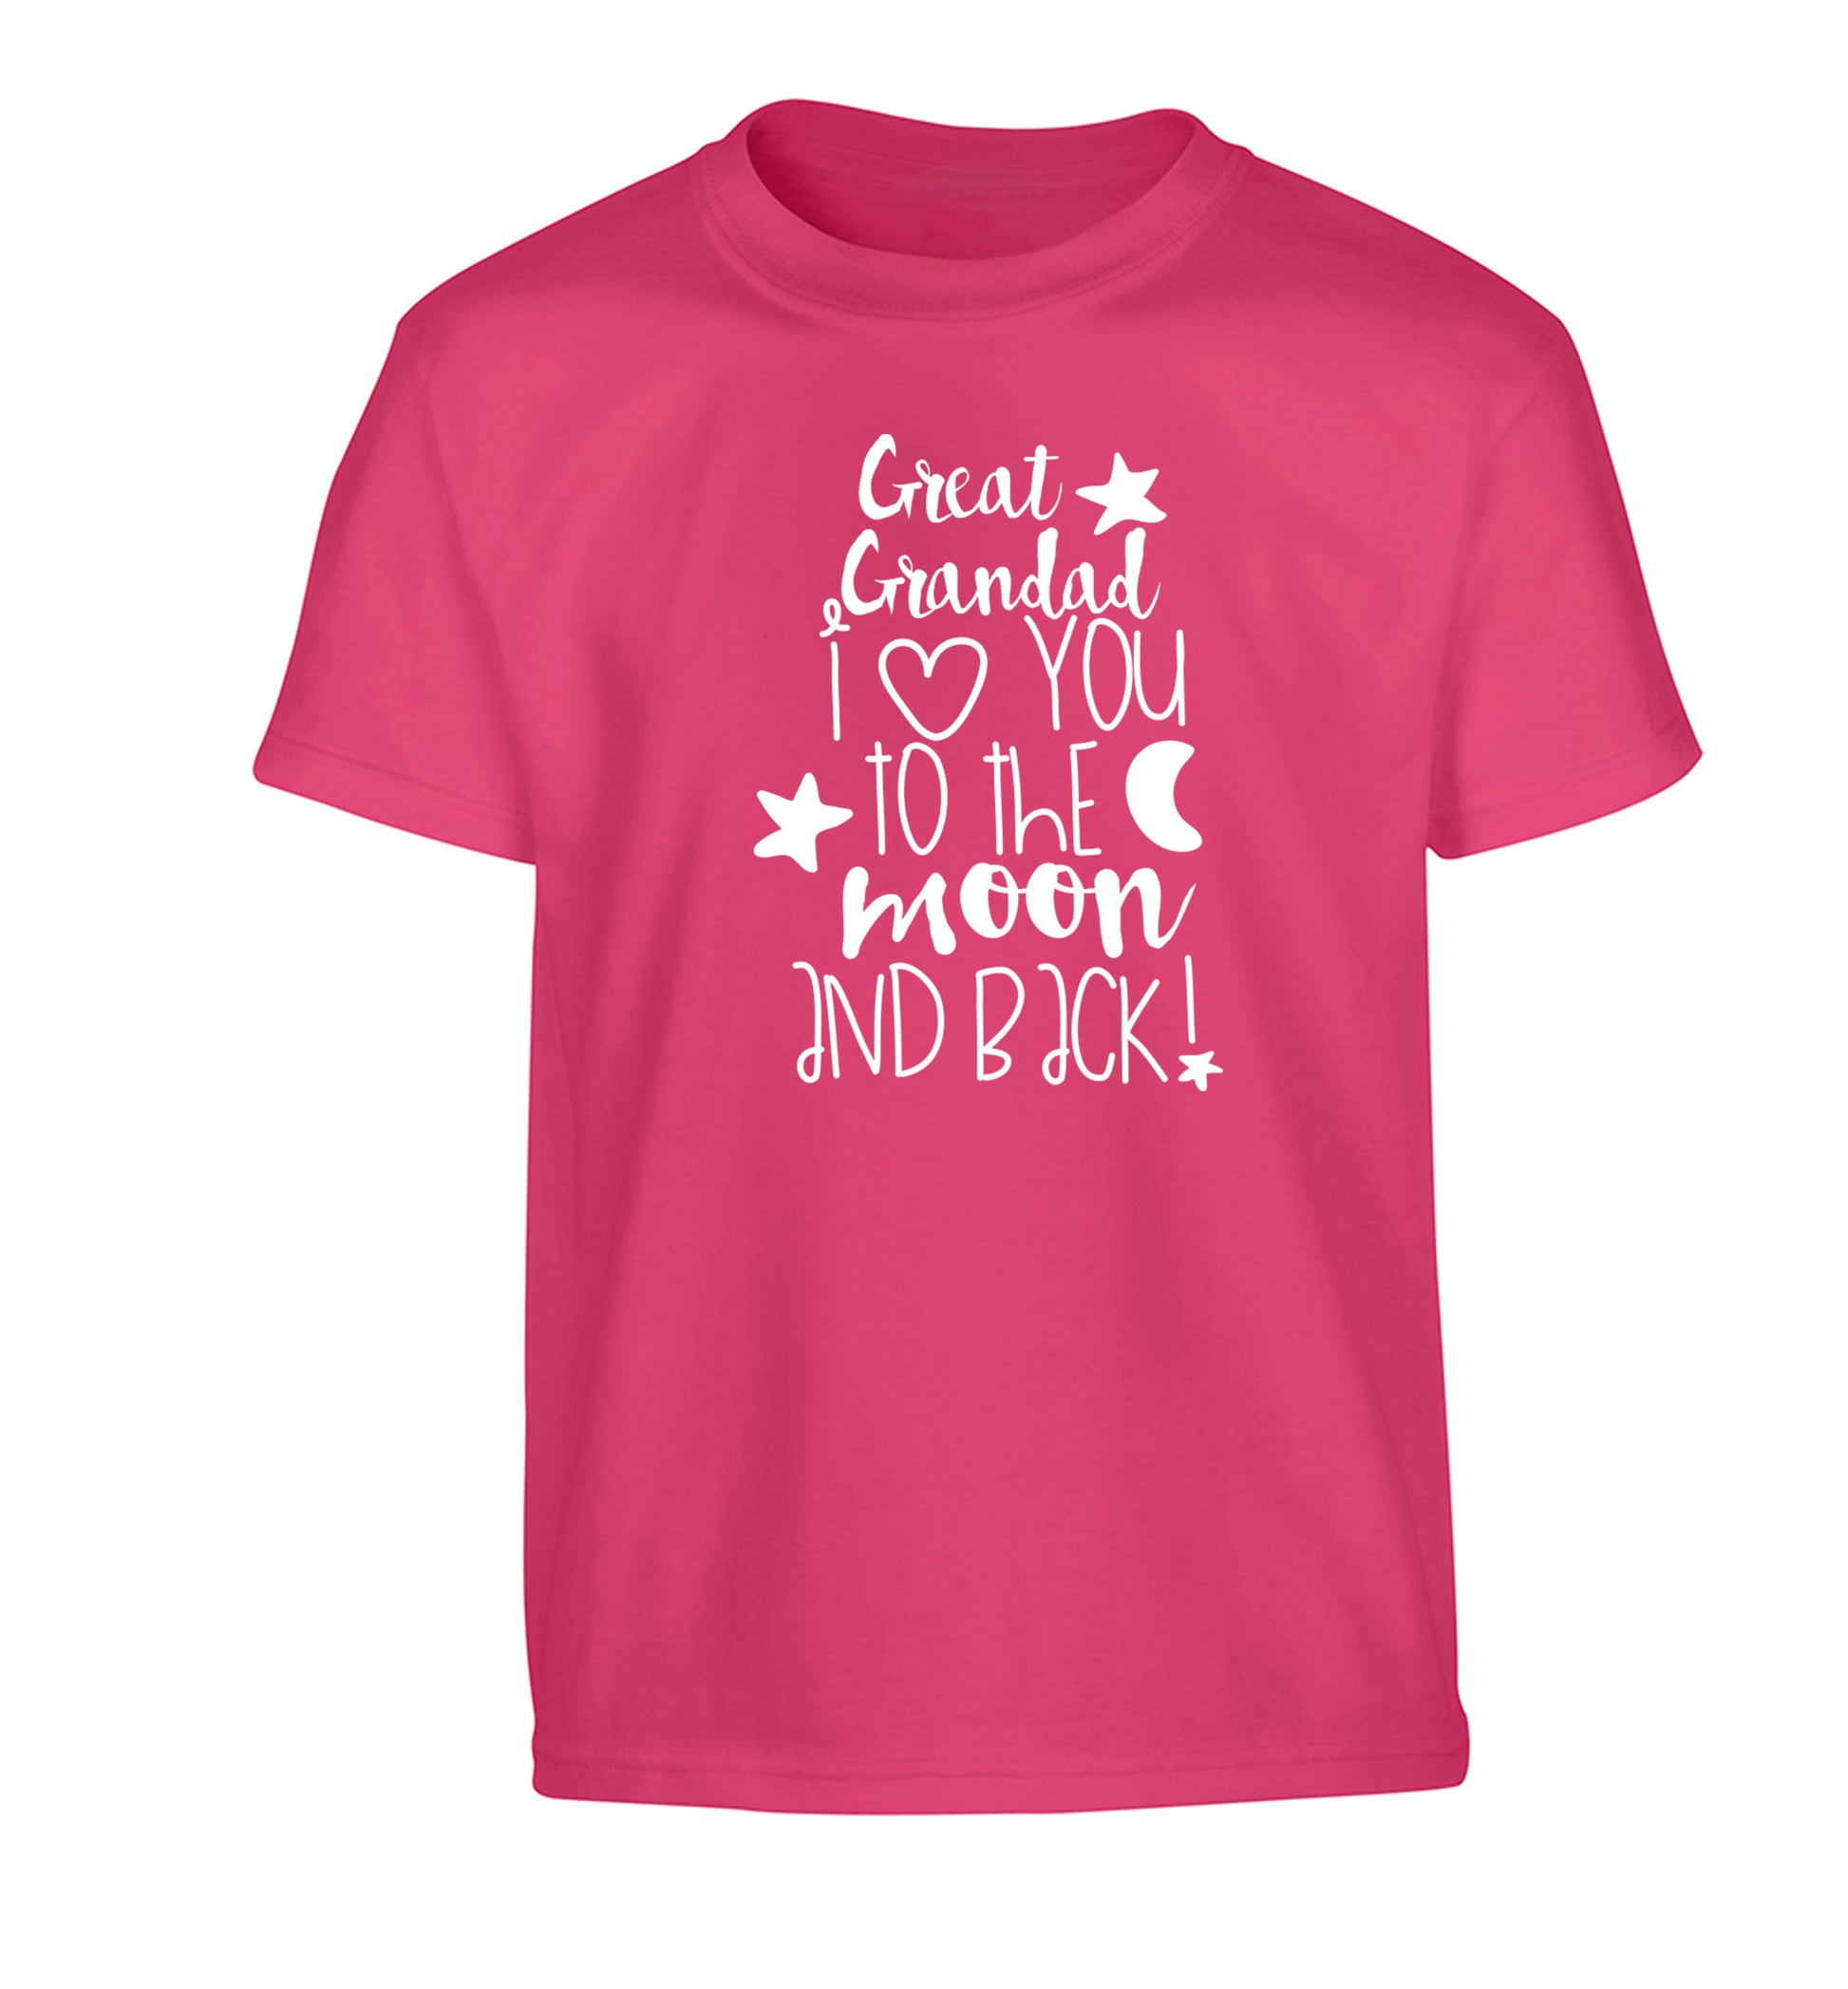 Great Grandad I love you to the moon and back Children's pink Tshirt 12-14 Years